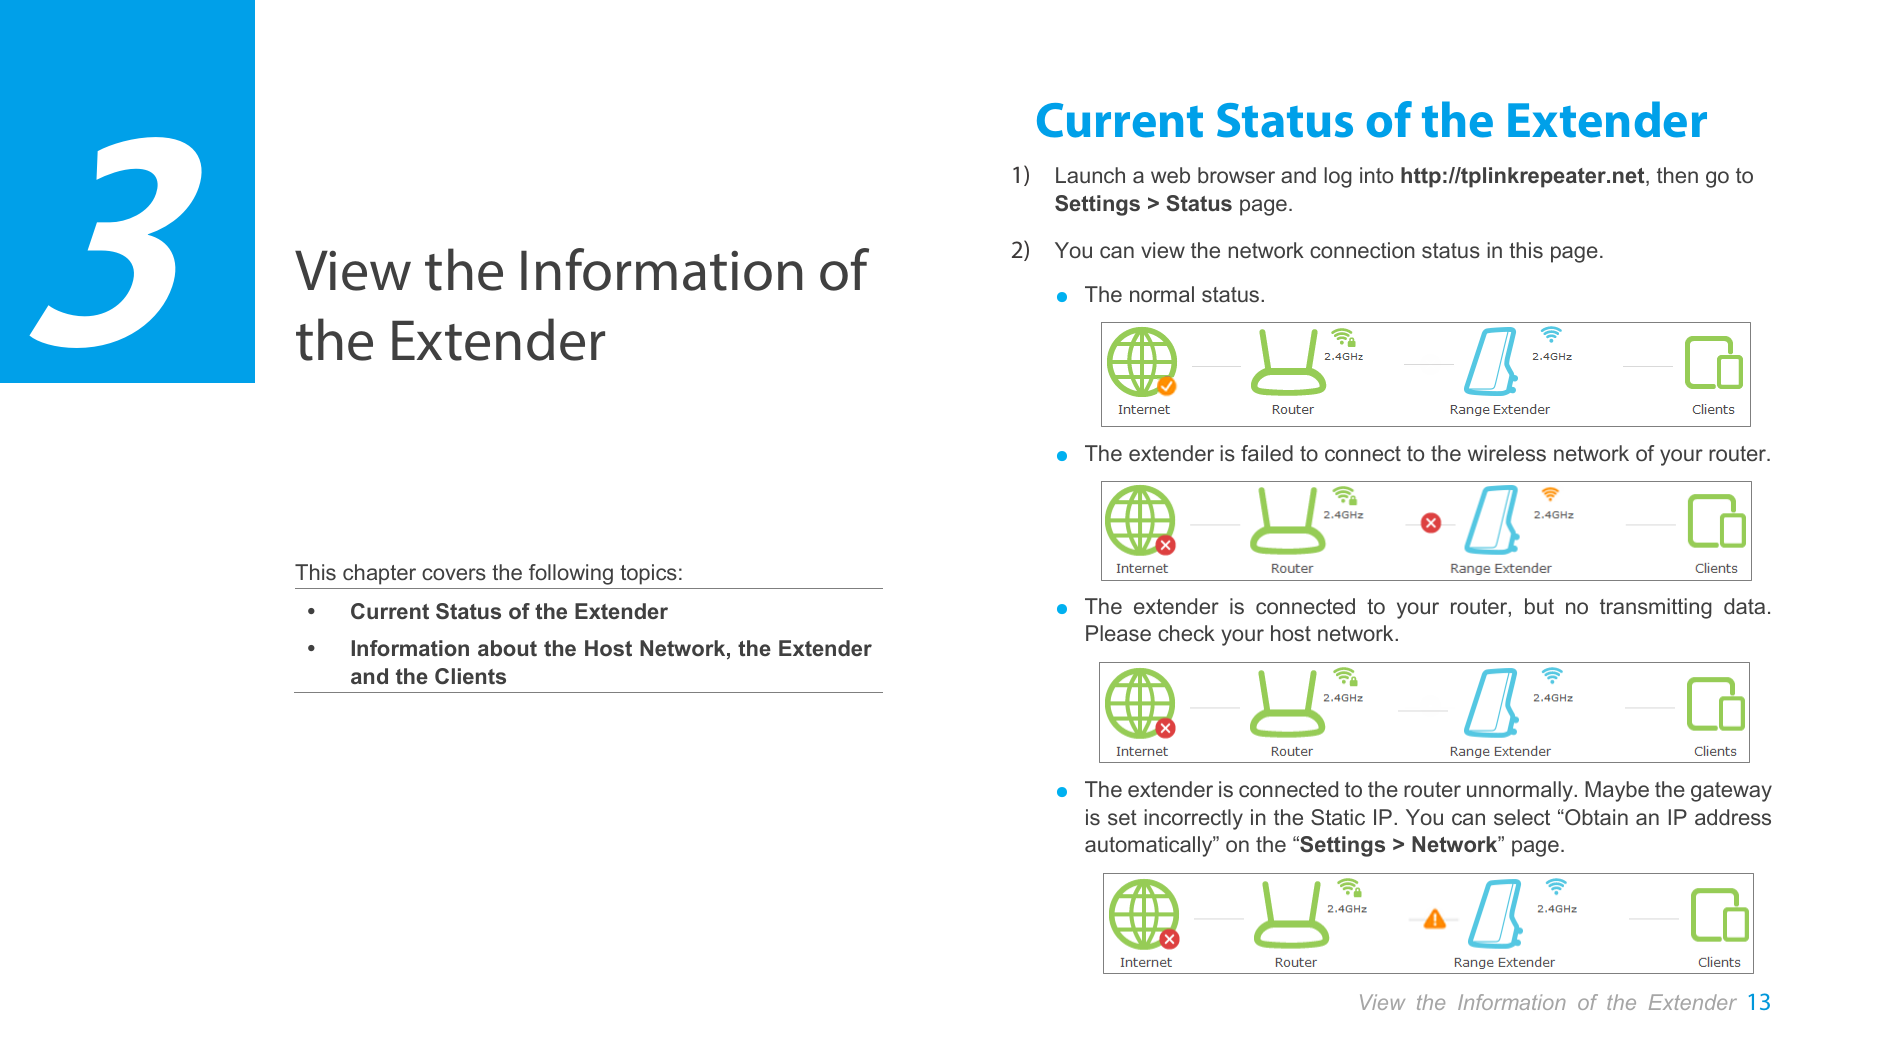  View the Information of the Extender 13  View the Information of the Extender       This chapter covers the following topics:  Current Status of the Extender  Information about the Host Network, the Extender and the Clients  Current Status of the Extender 1) Launch a web browser and log into http://tplinkrepeater.net, then go to Settings &gt; Status page. 2) You can view the network connection status in this page. ● The normal status.  ● The extender is failed to connect to the wireless network of your router.  ● The  extender is connected to your router, but no transmitting data. Please check your host network.     ● The extender is connected to the router unnormally. Maybe the gateway is set incorrectly in the Static IP. You can select “Obtain an IP address automatically” on the “Settings &gt; Network” page.  3 